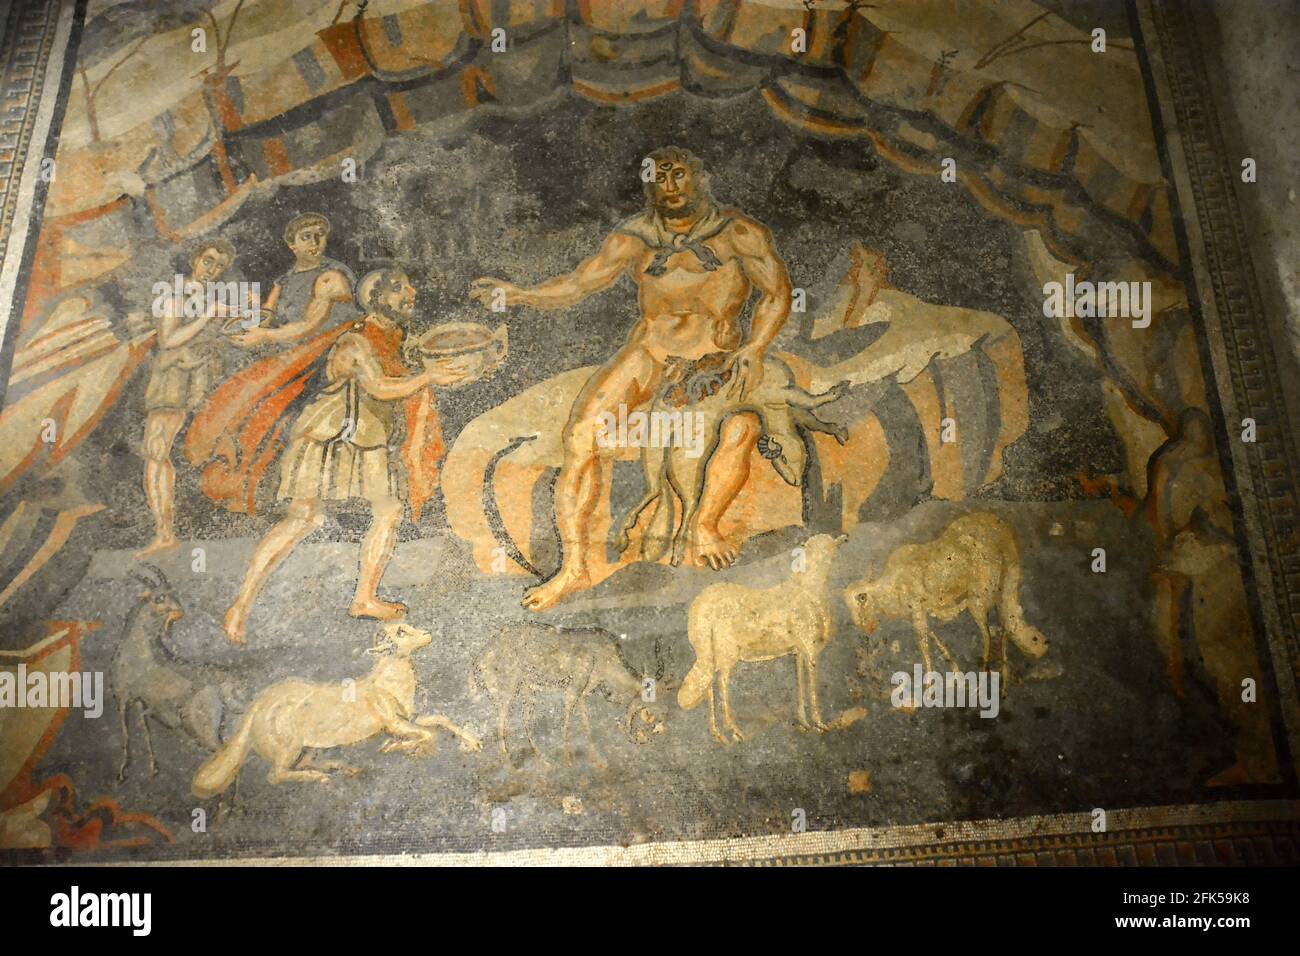 Ancient Roman mosaic of Odysseus getting the Cyclops Giant Polyphemus drunk in his cave. From Book IX of the Odyssey. In the UNESCO listed Ancient Rom Stock Photo